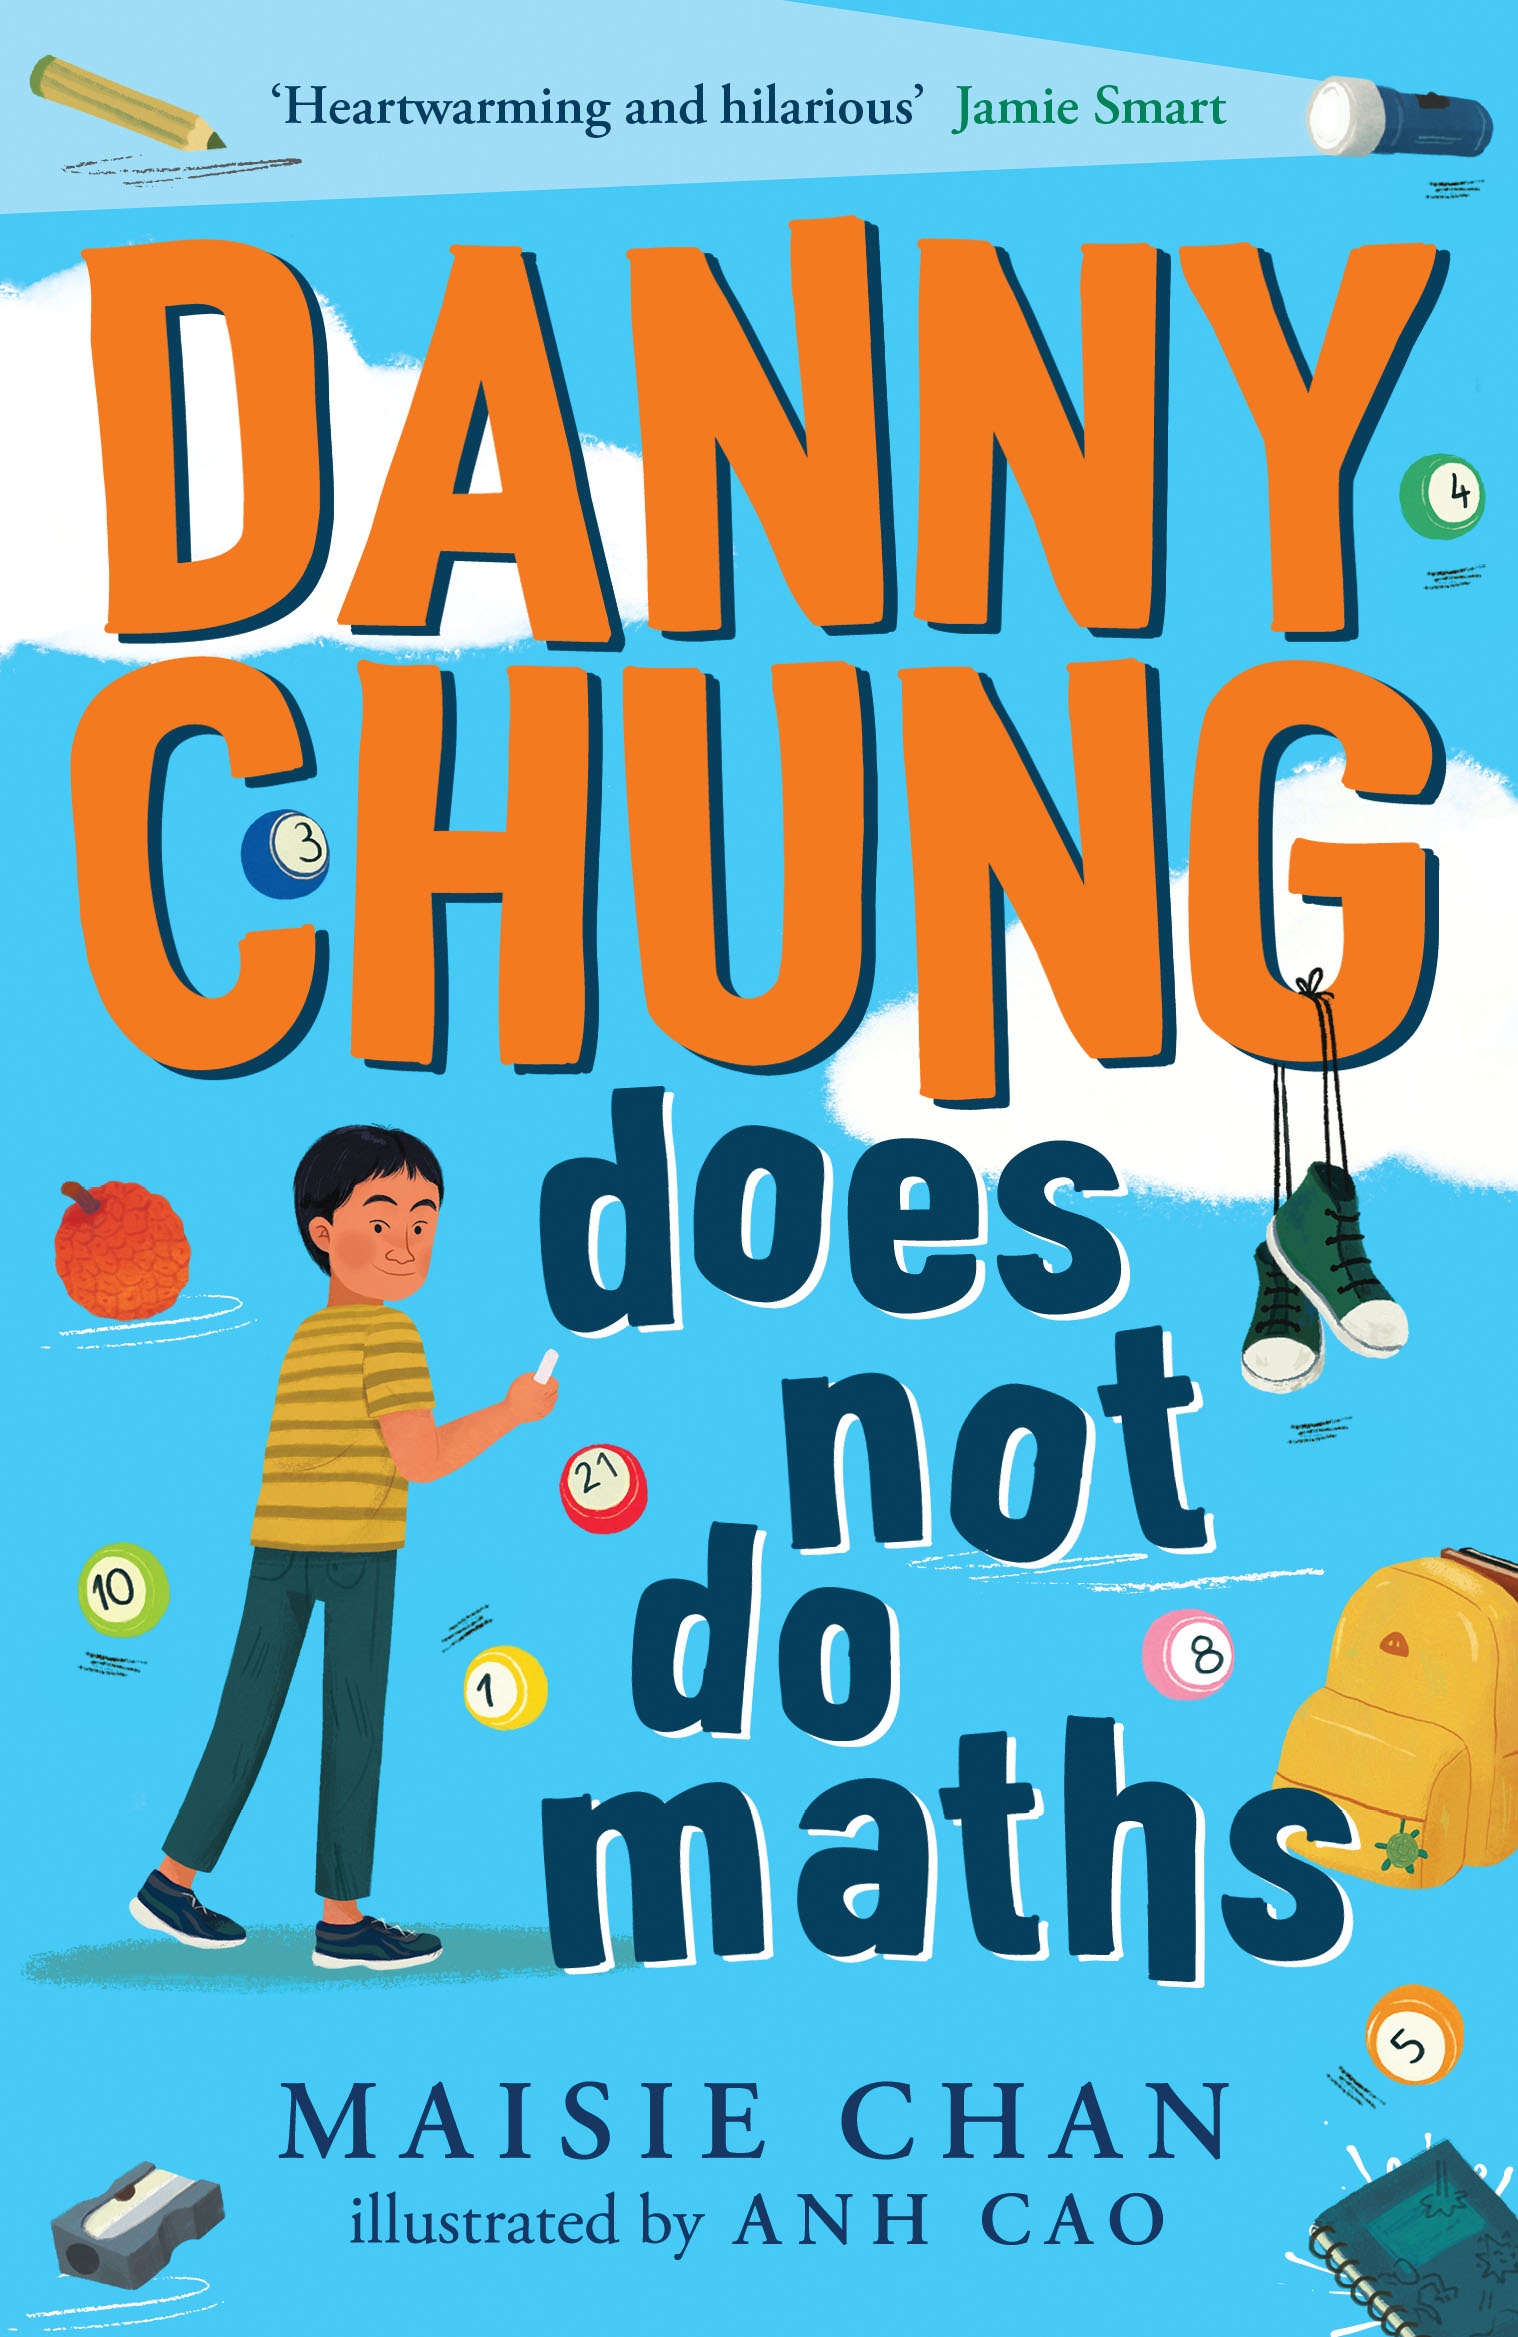 Danny Chung final cover with Jamie Smart quote